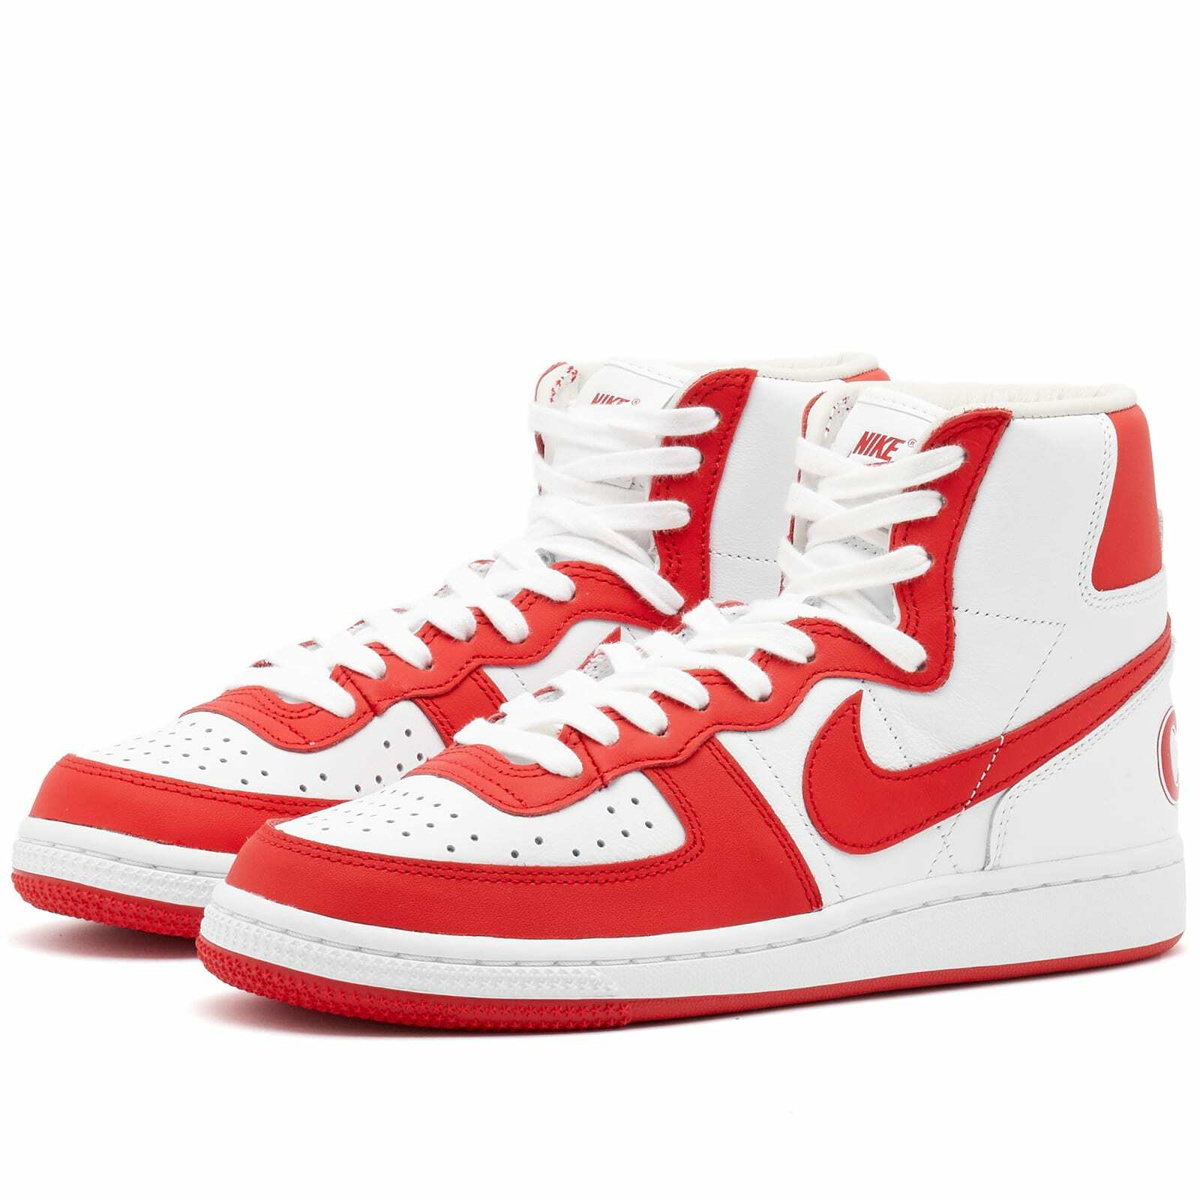 Comme des Garçons Homme Plus x Nike Terminator W Sneakers in Red Comme ...